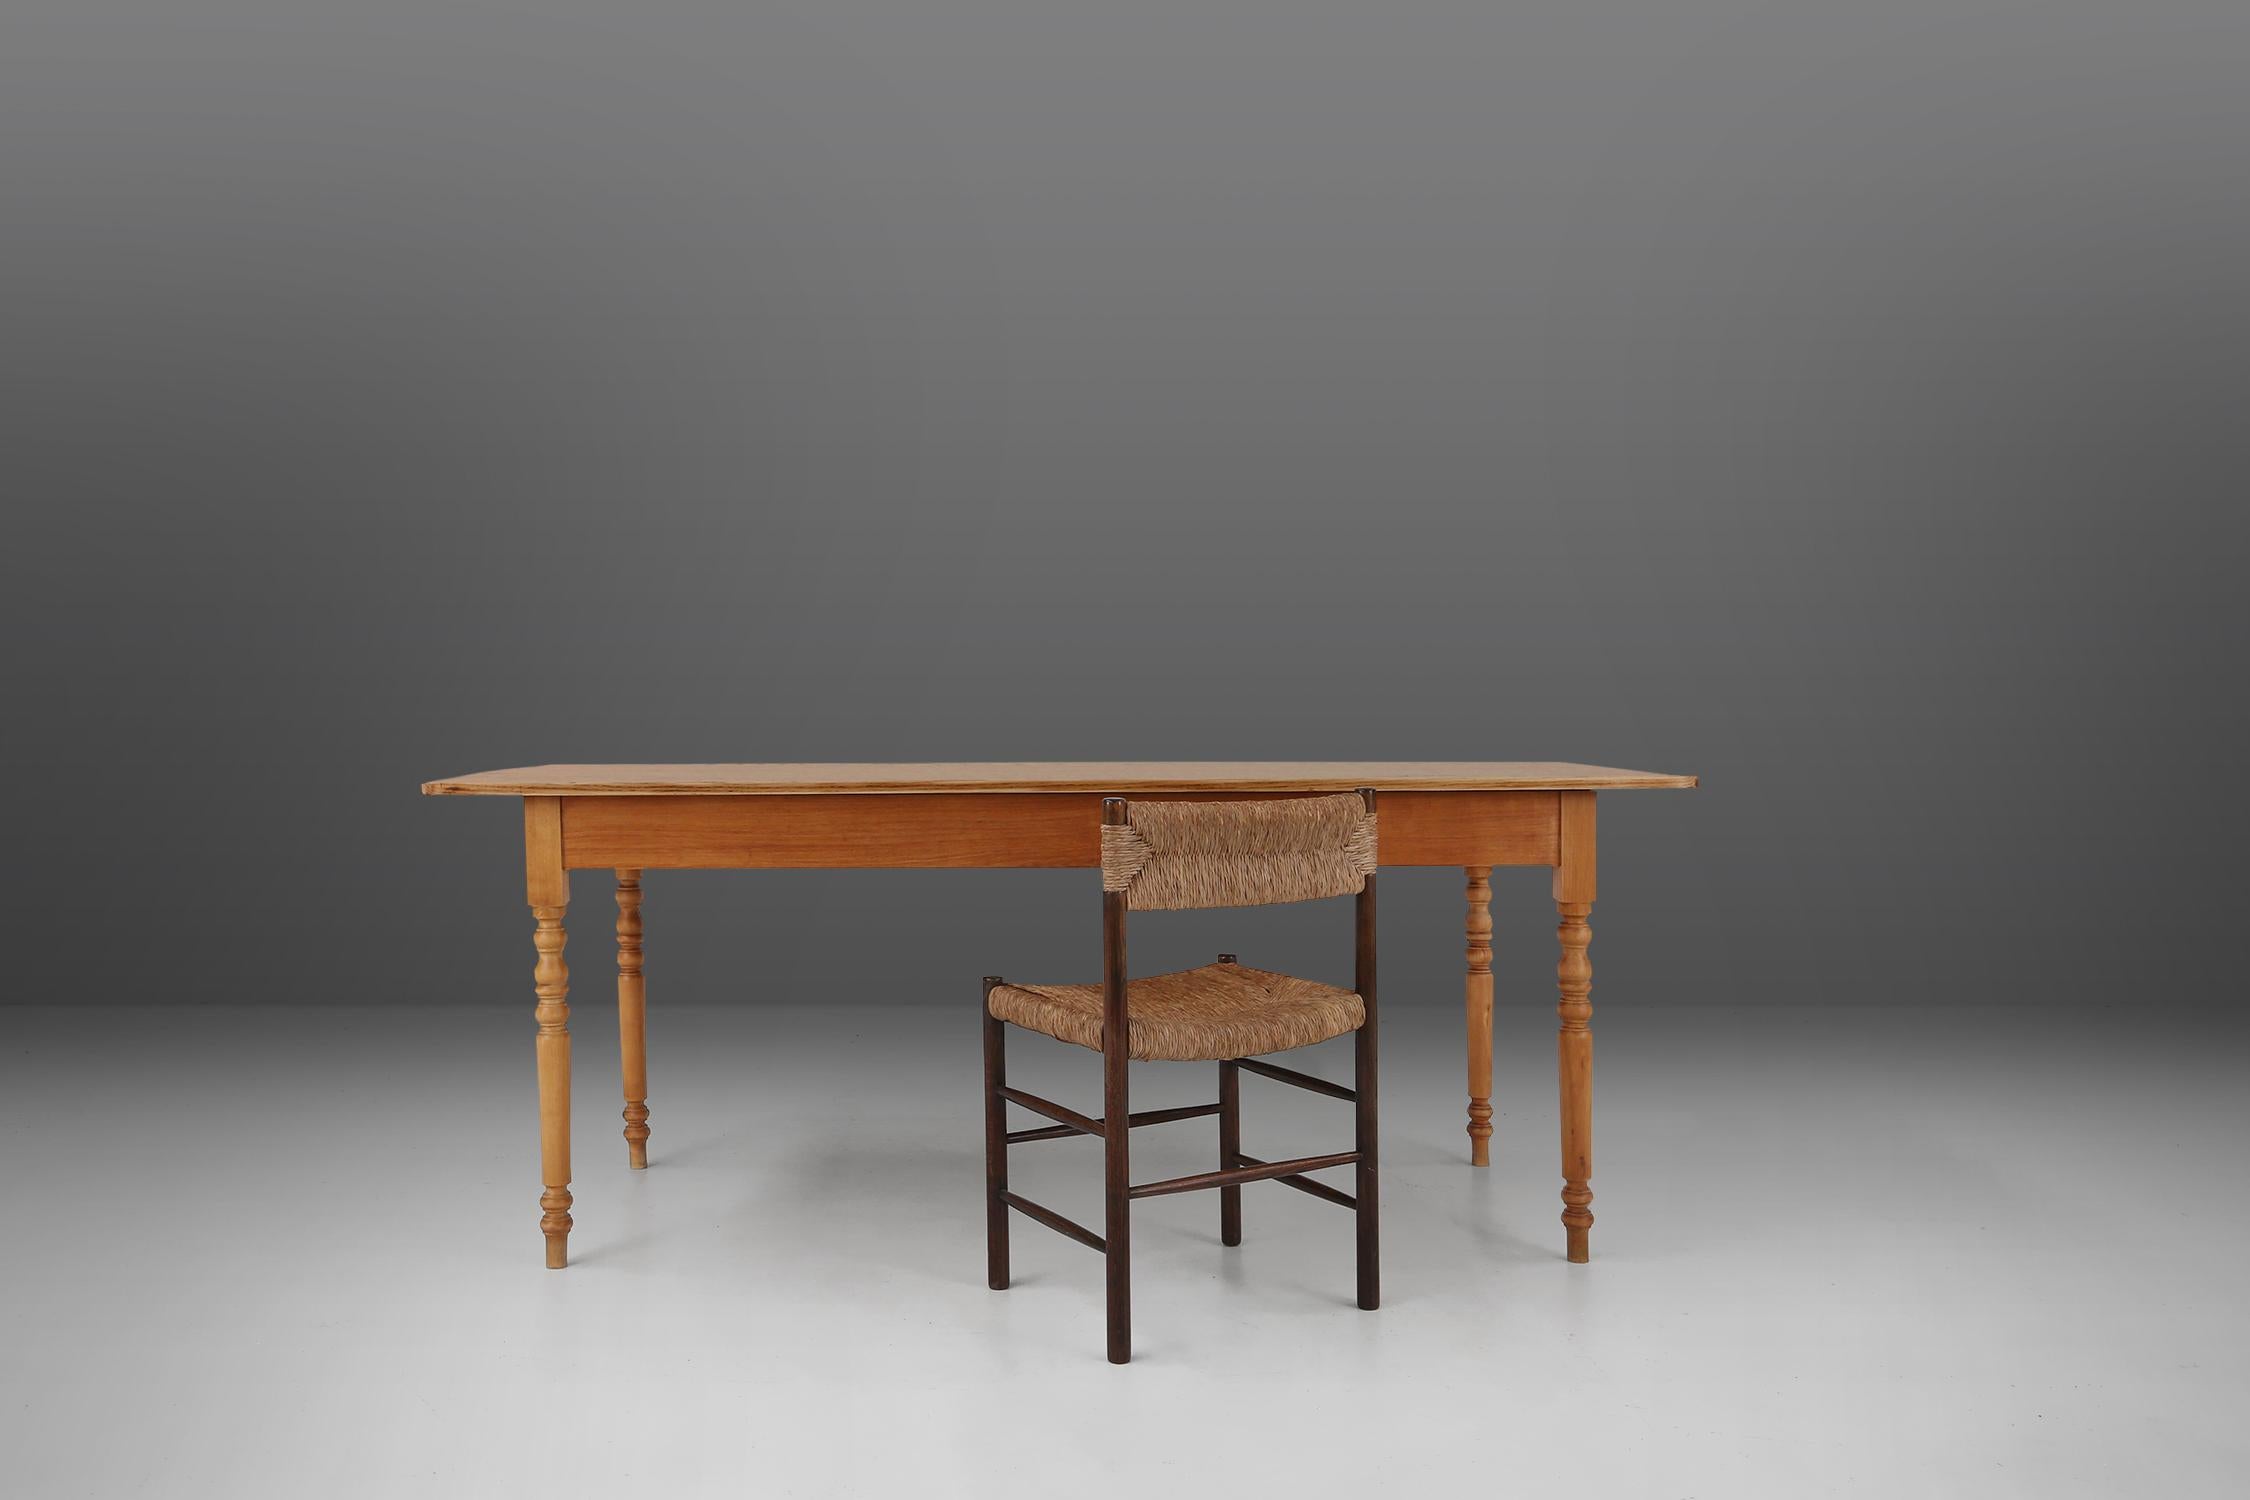 France / 1850 / farm table / wood / rustic

An exceptional antique French campaign dining table in wood with elegant turned legs. Crafted in France around 1850, this farm table will bring a touch of sophistication to your dining space. Made from